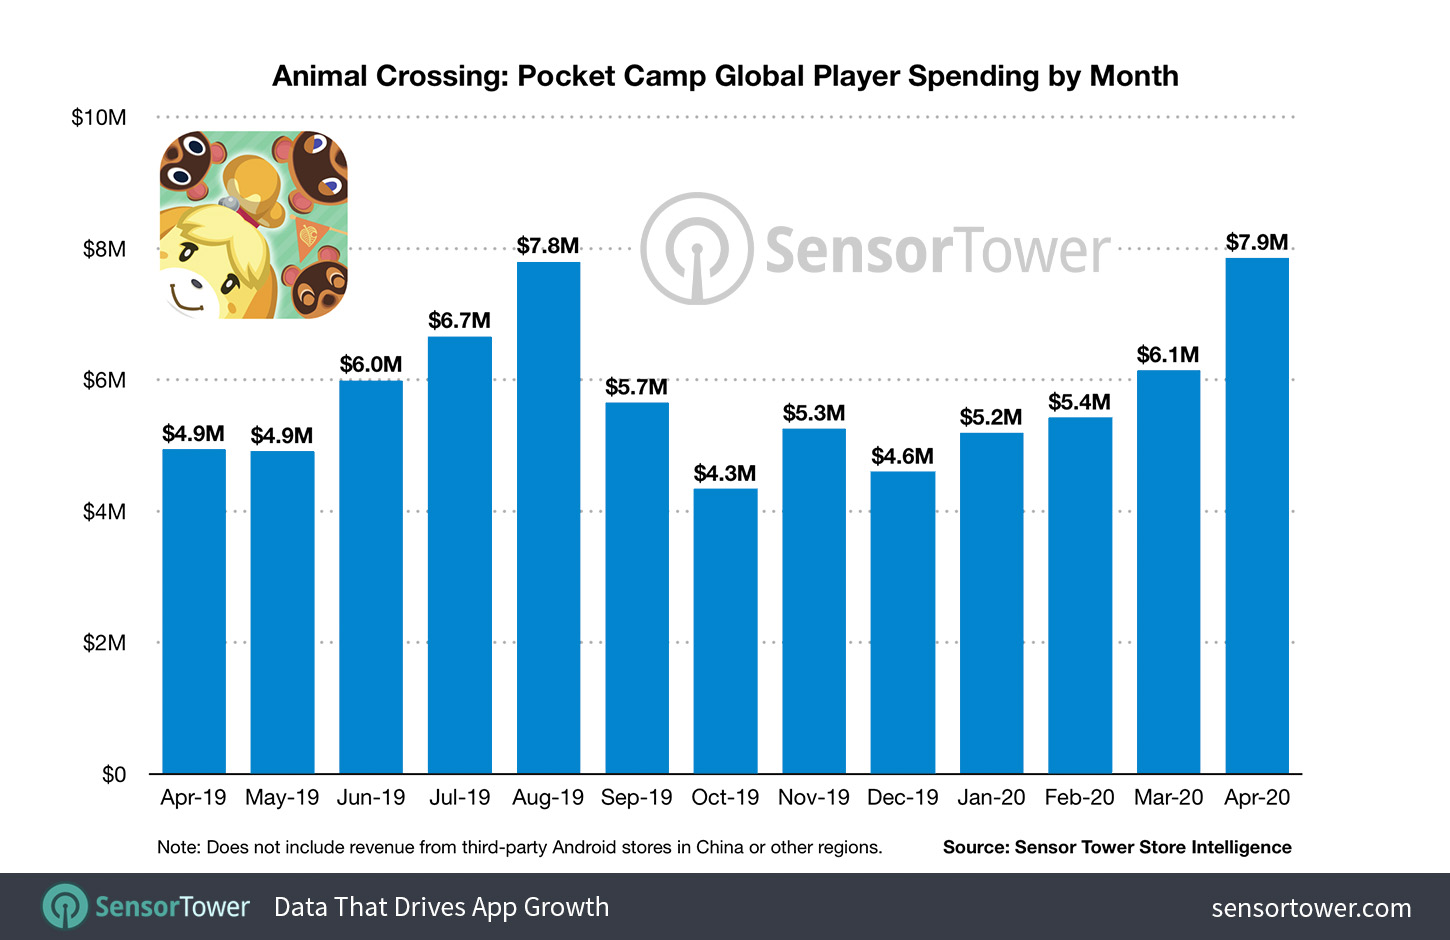 Global Animal Crossing Pocket Camp User Spending by Month